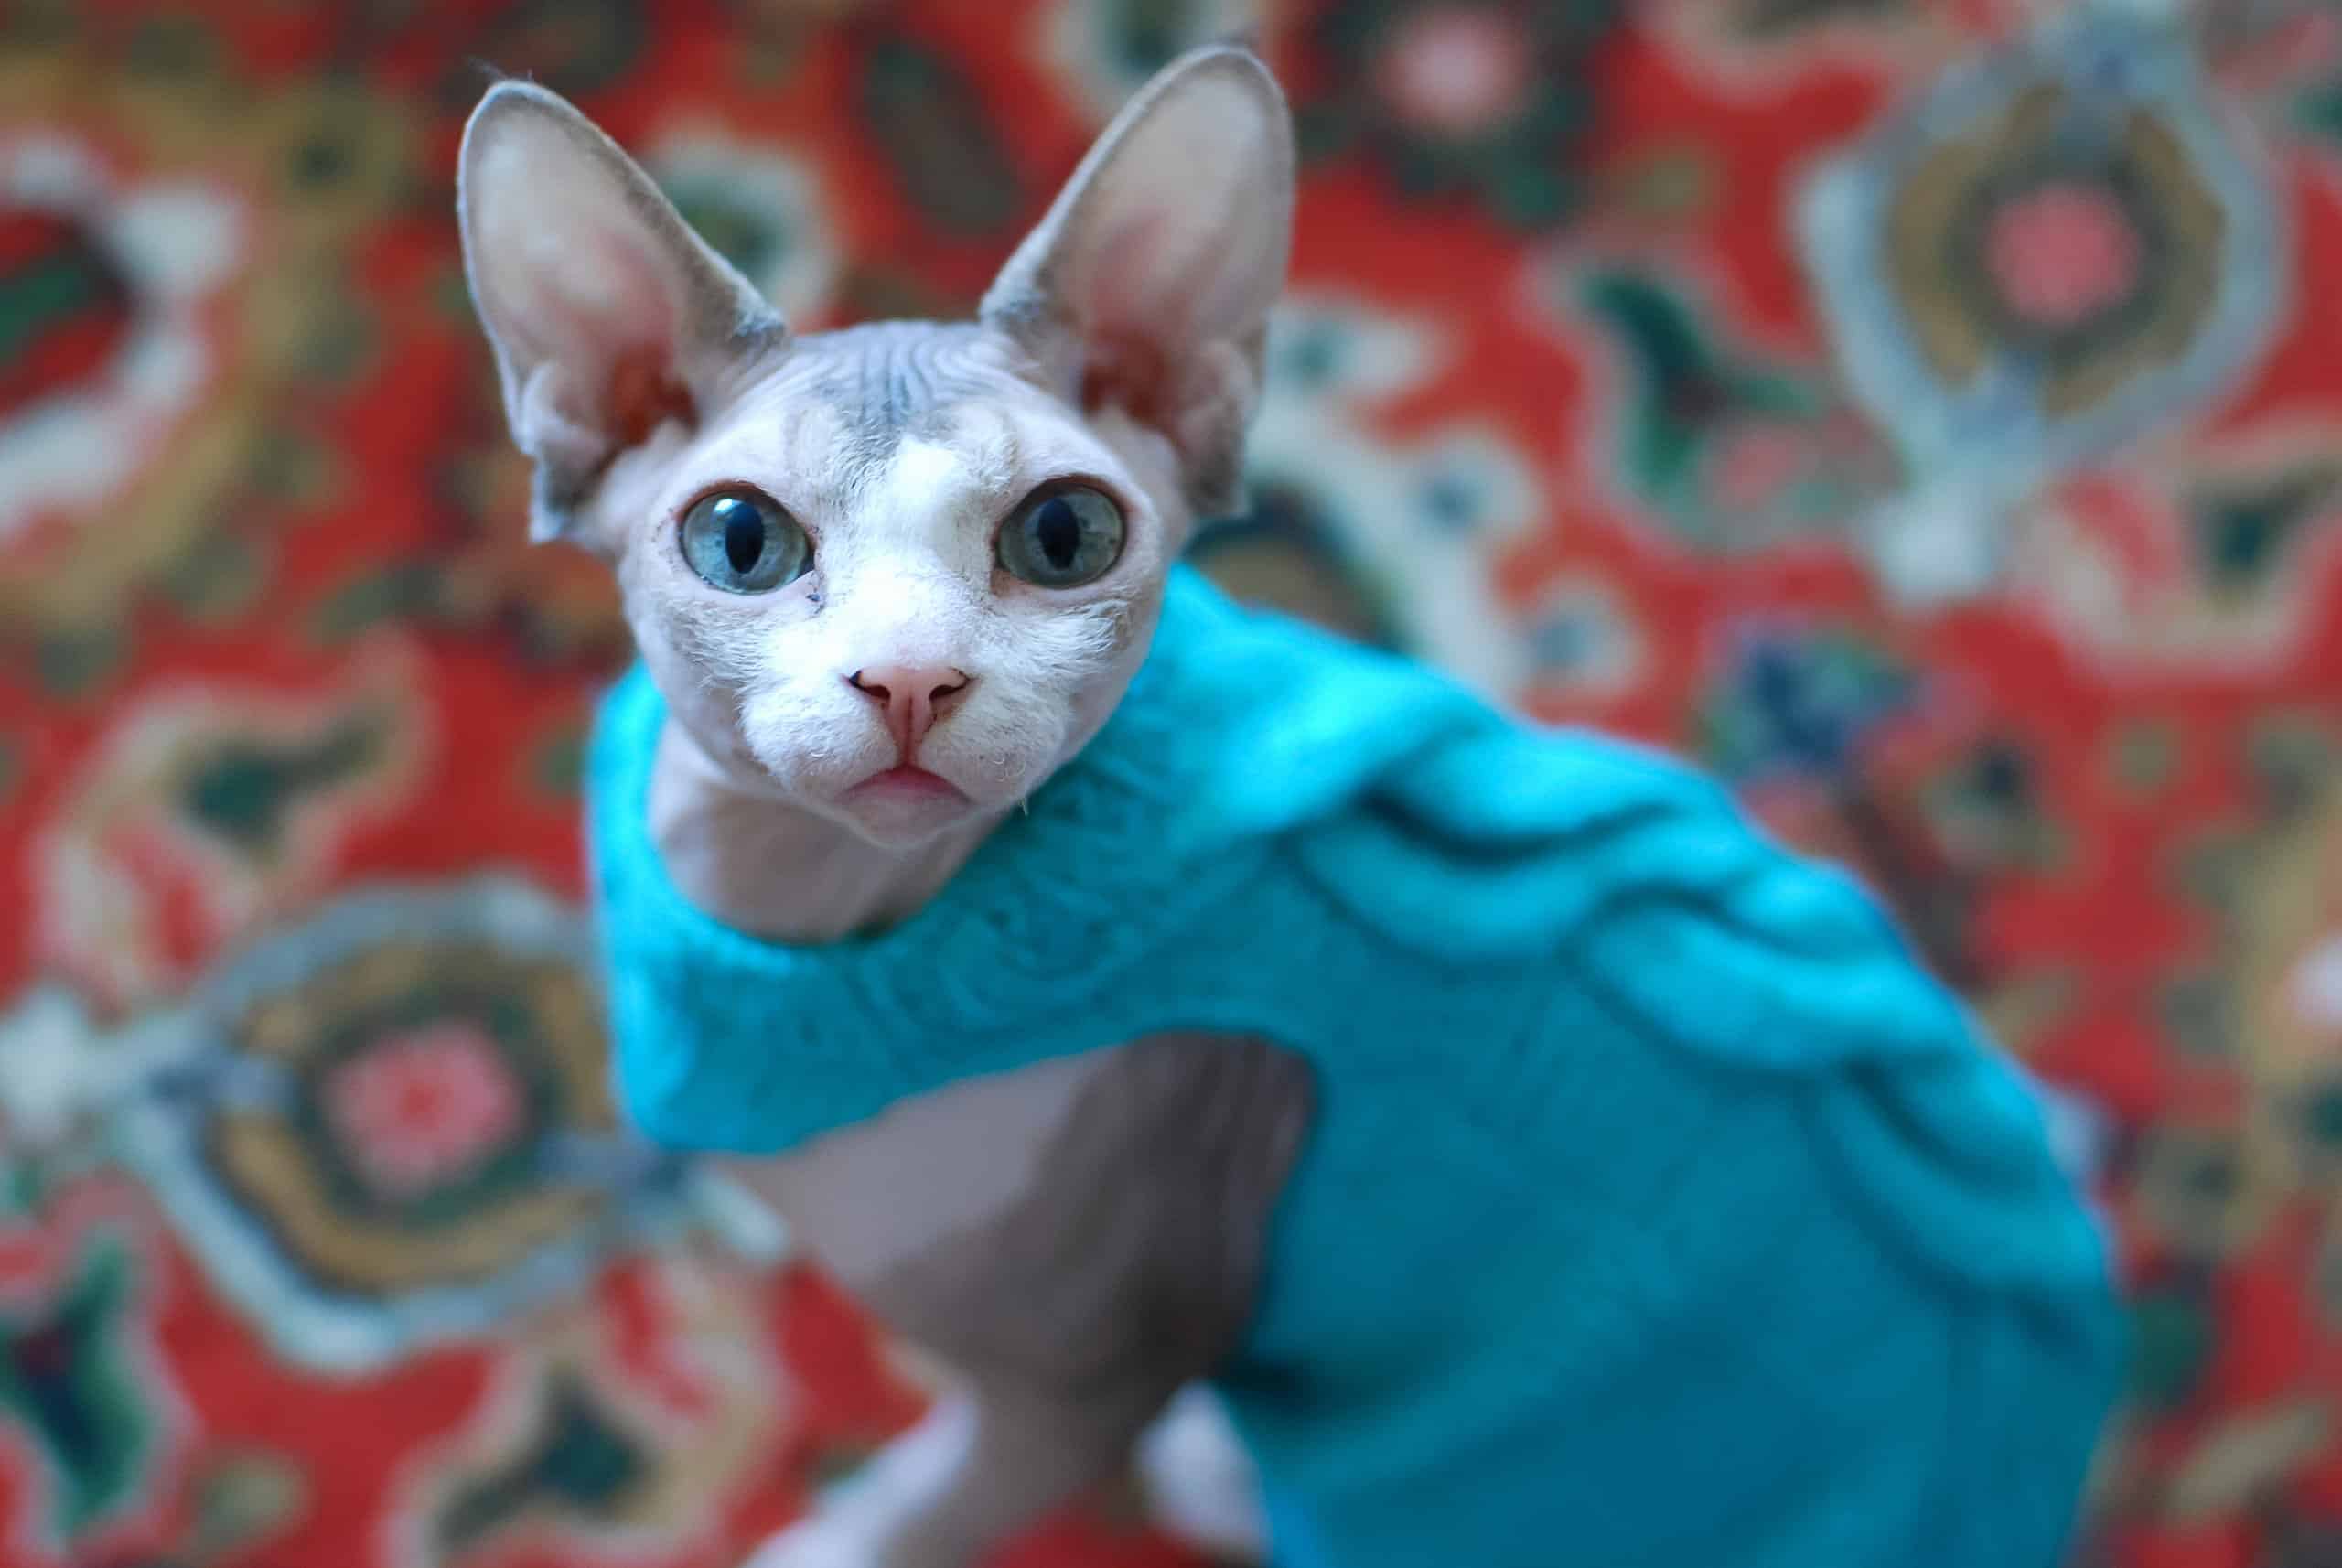 Sphynx cat seriously looking into the camera in a sweater against the backdrop of a sharp carpet